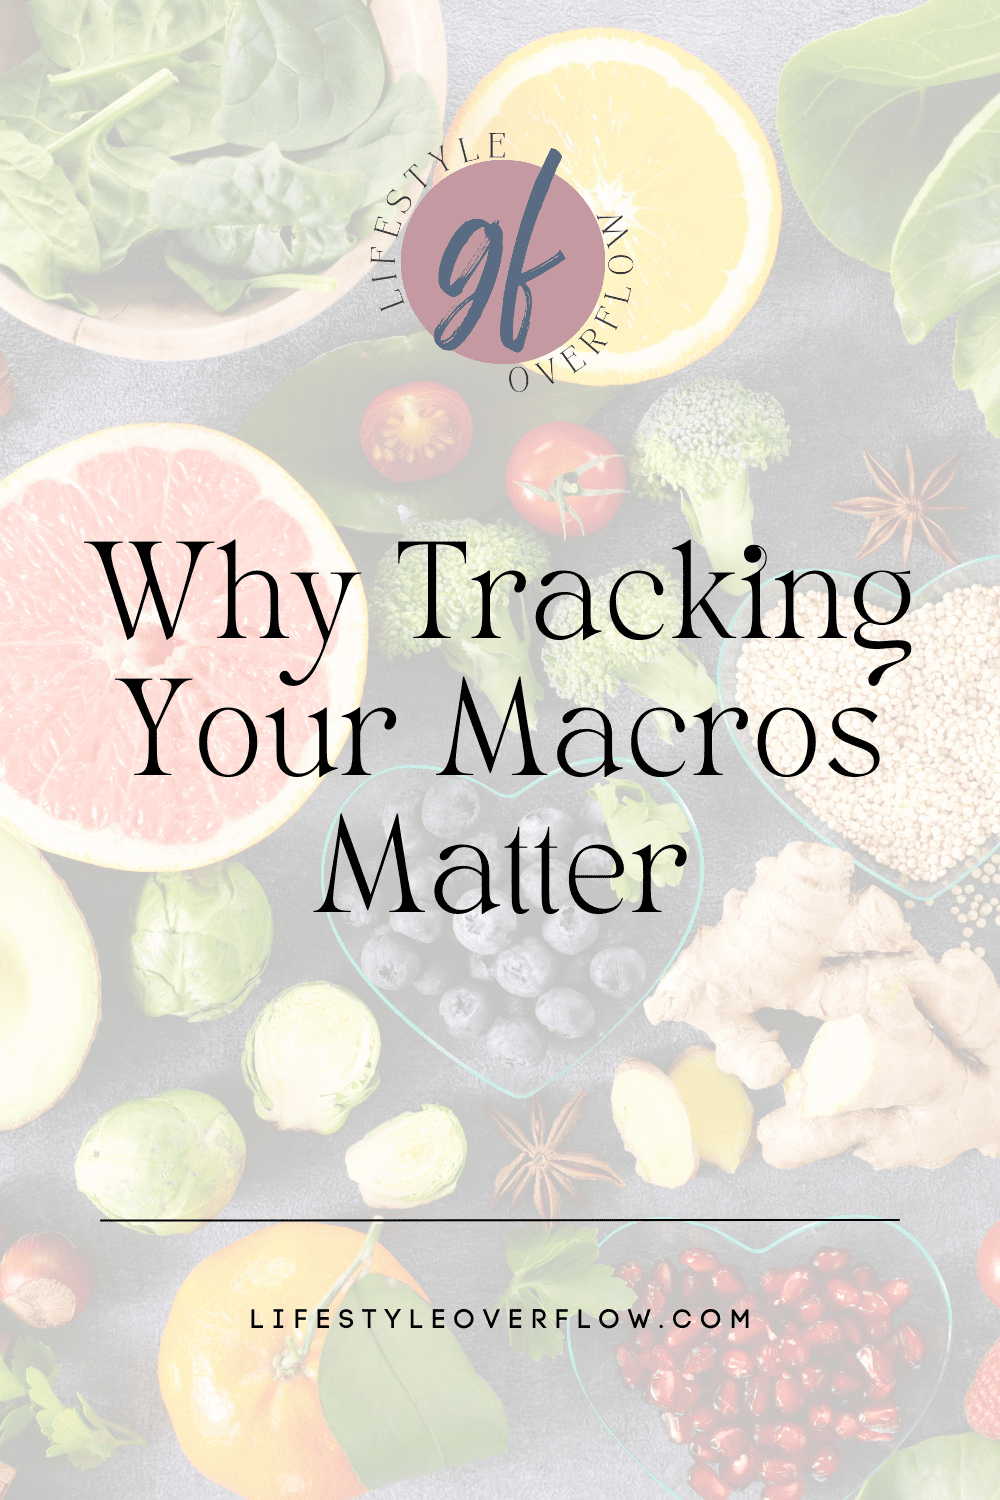 why tracking your macros matter by Gina Forcatto - lifestyleloverflow.com